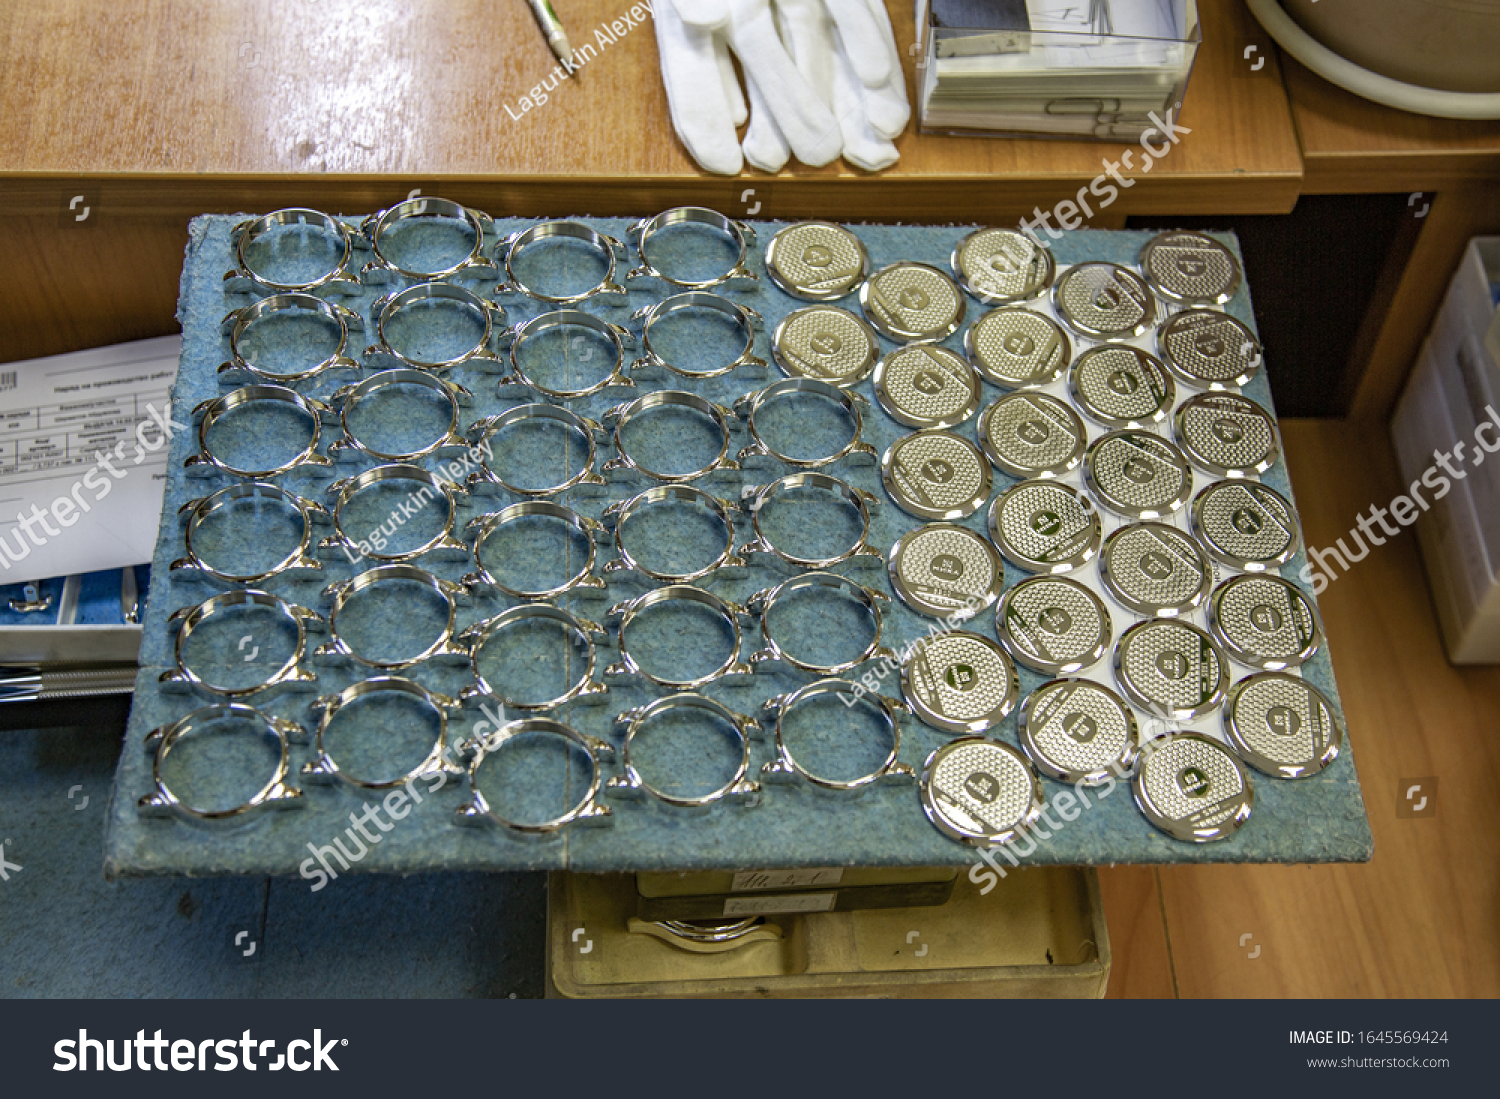 stock-photo-moscow-russia-february-component-parts-of-the-watch-factory-nika-products-manufacture-1645569424.jpg